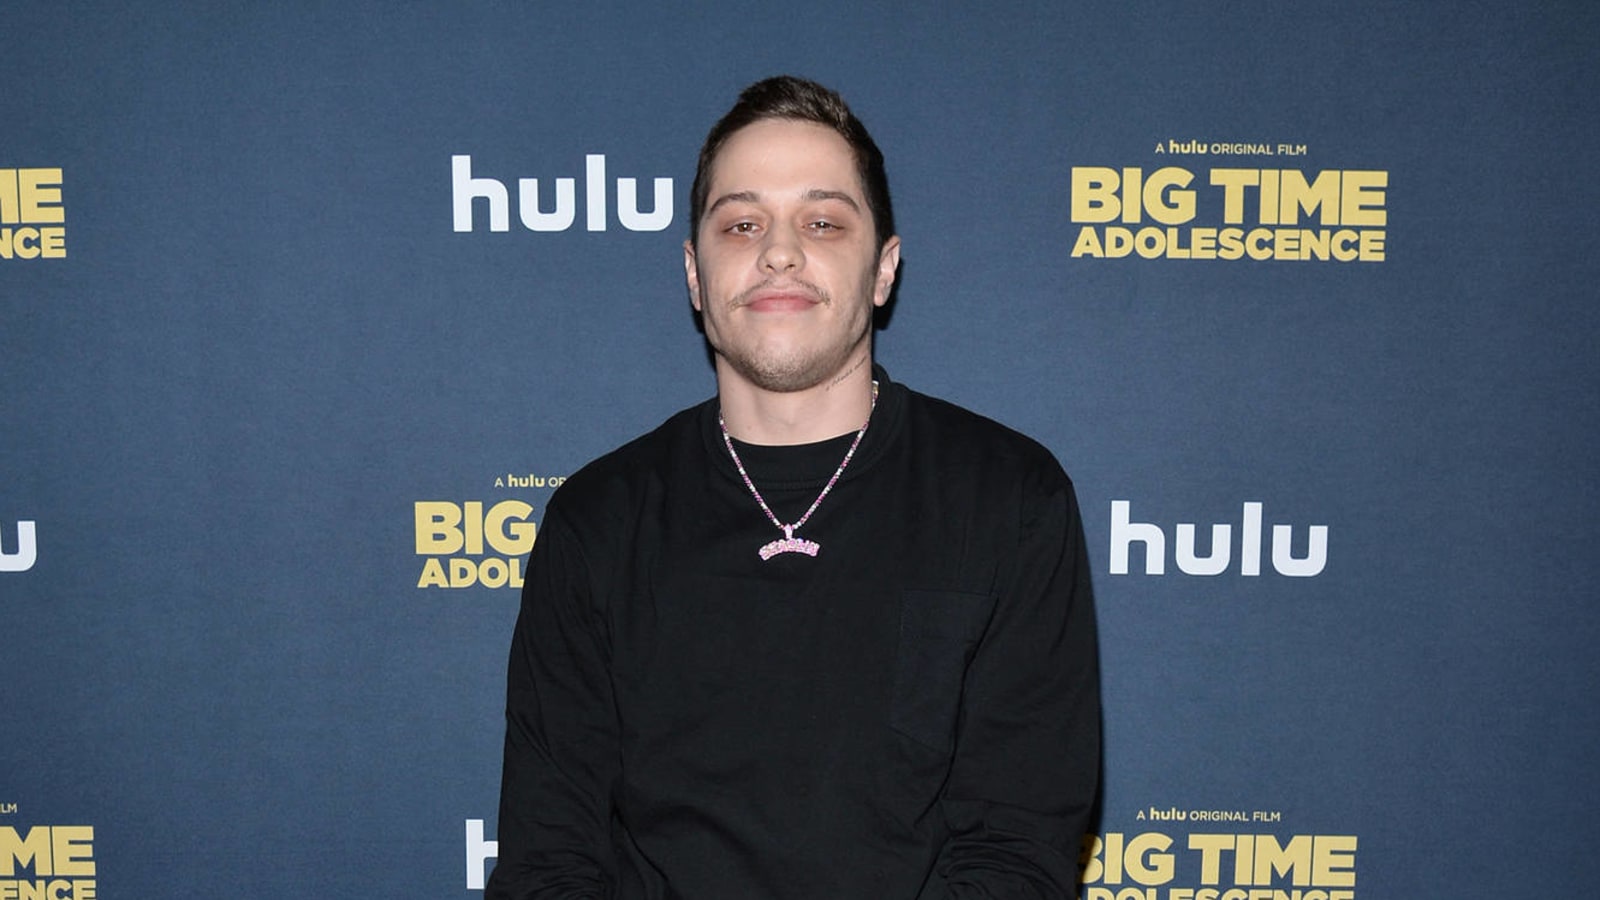 Watch: Pete Davidson attempts to play 'Like A Virgin' on an upright bass